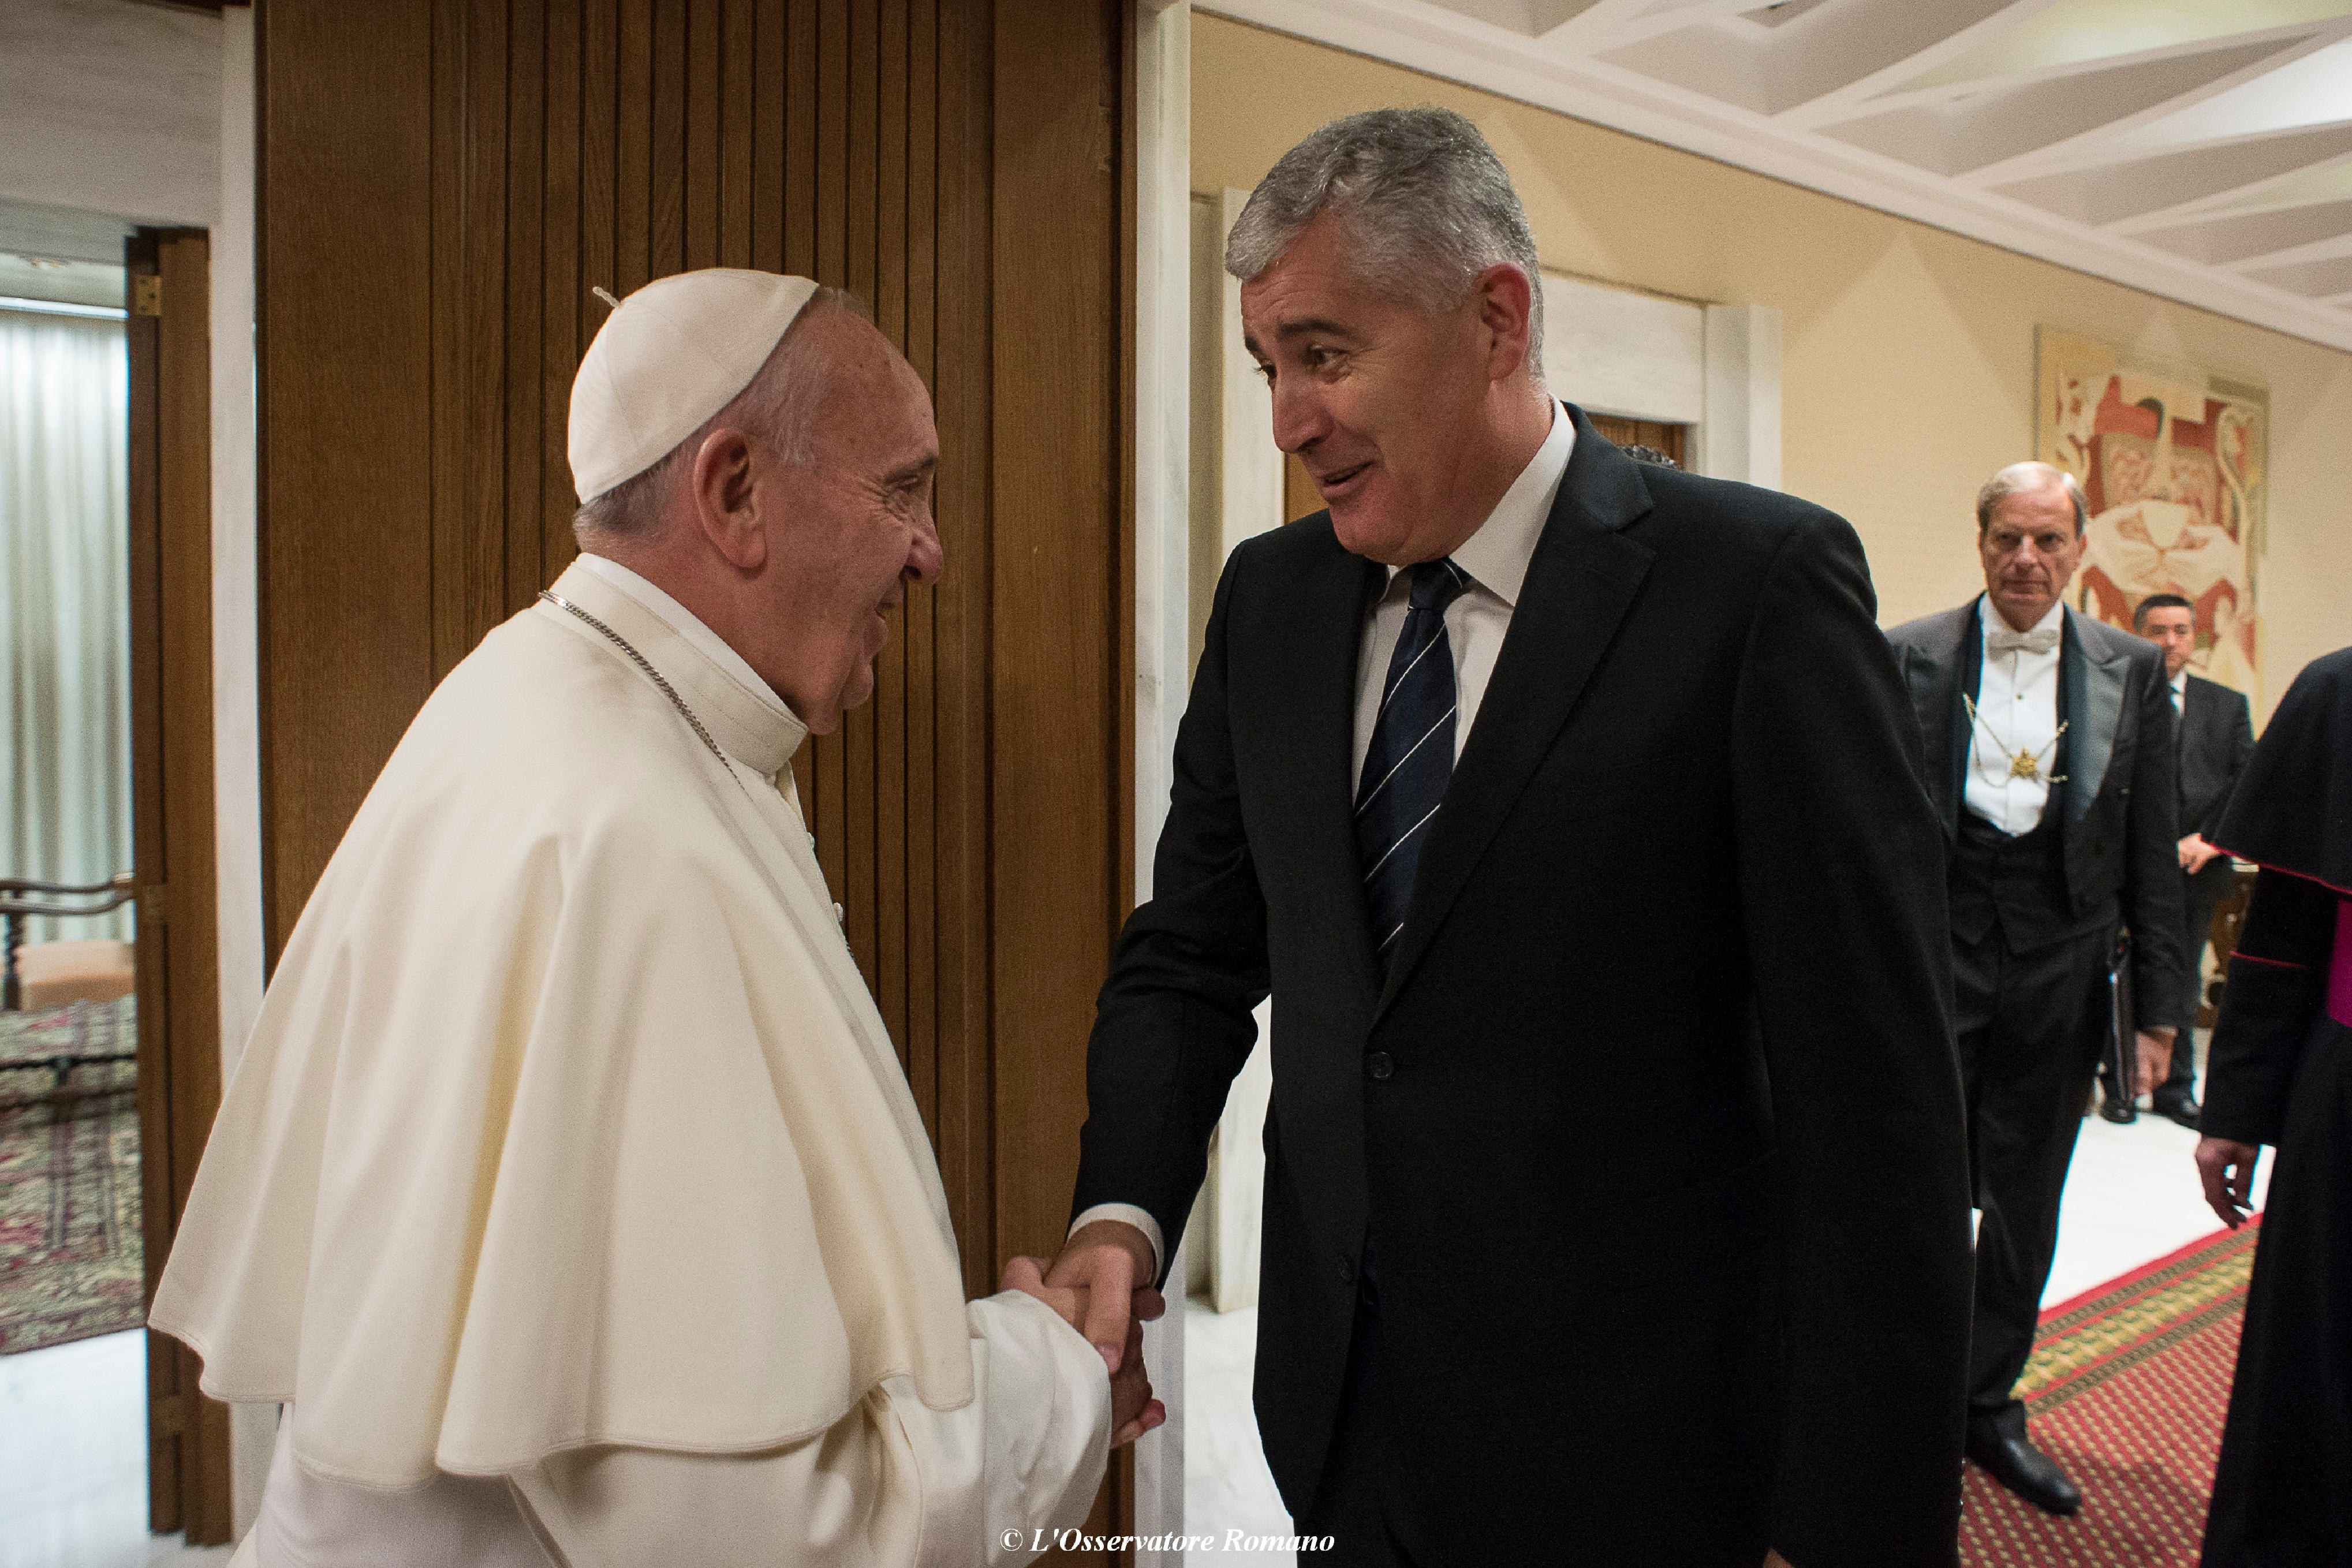 Pope Francis receives the Chairman of the Presidency of Bosnia and Herzegovina